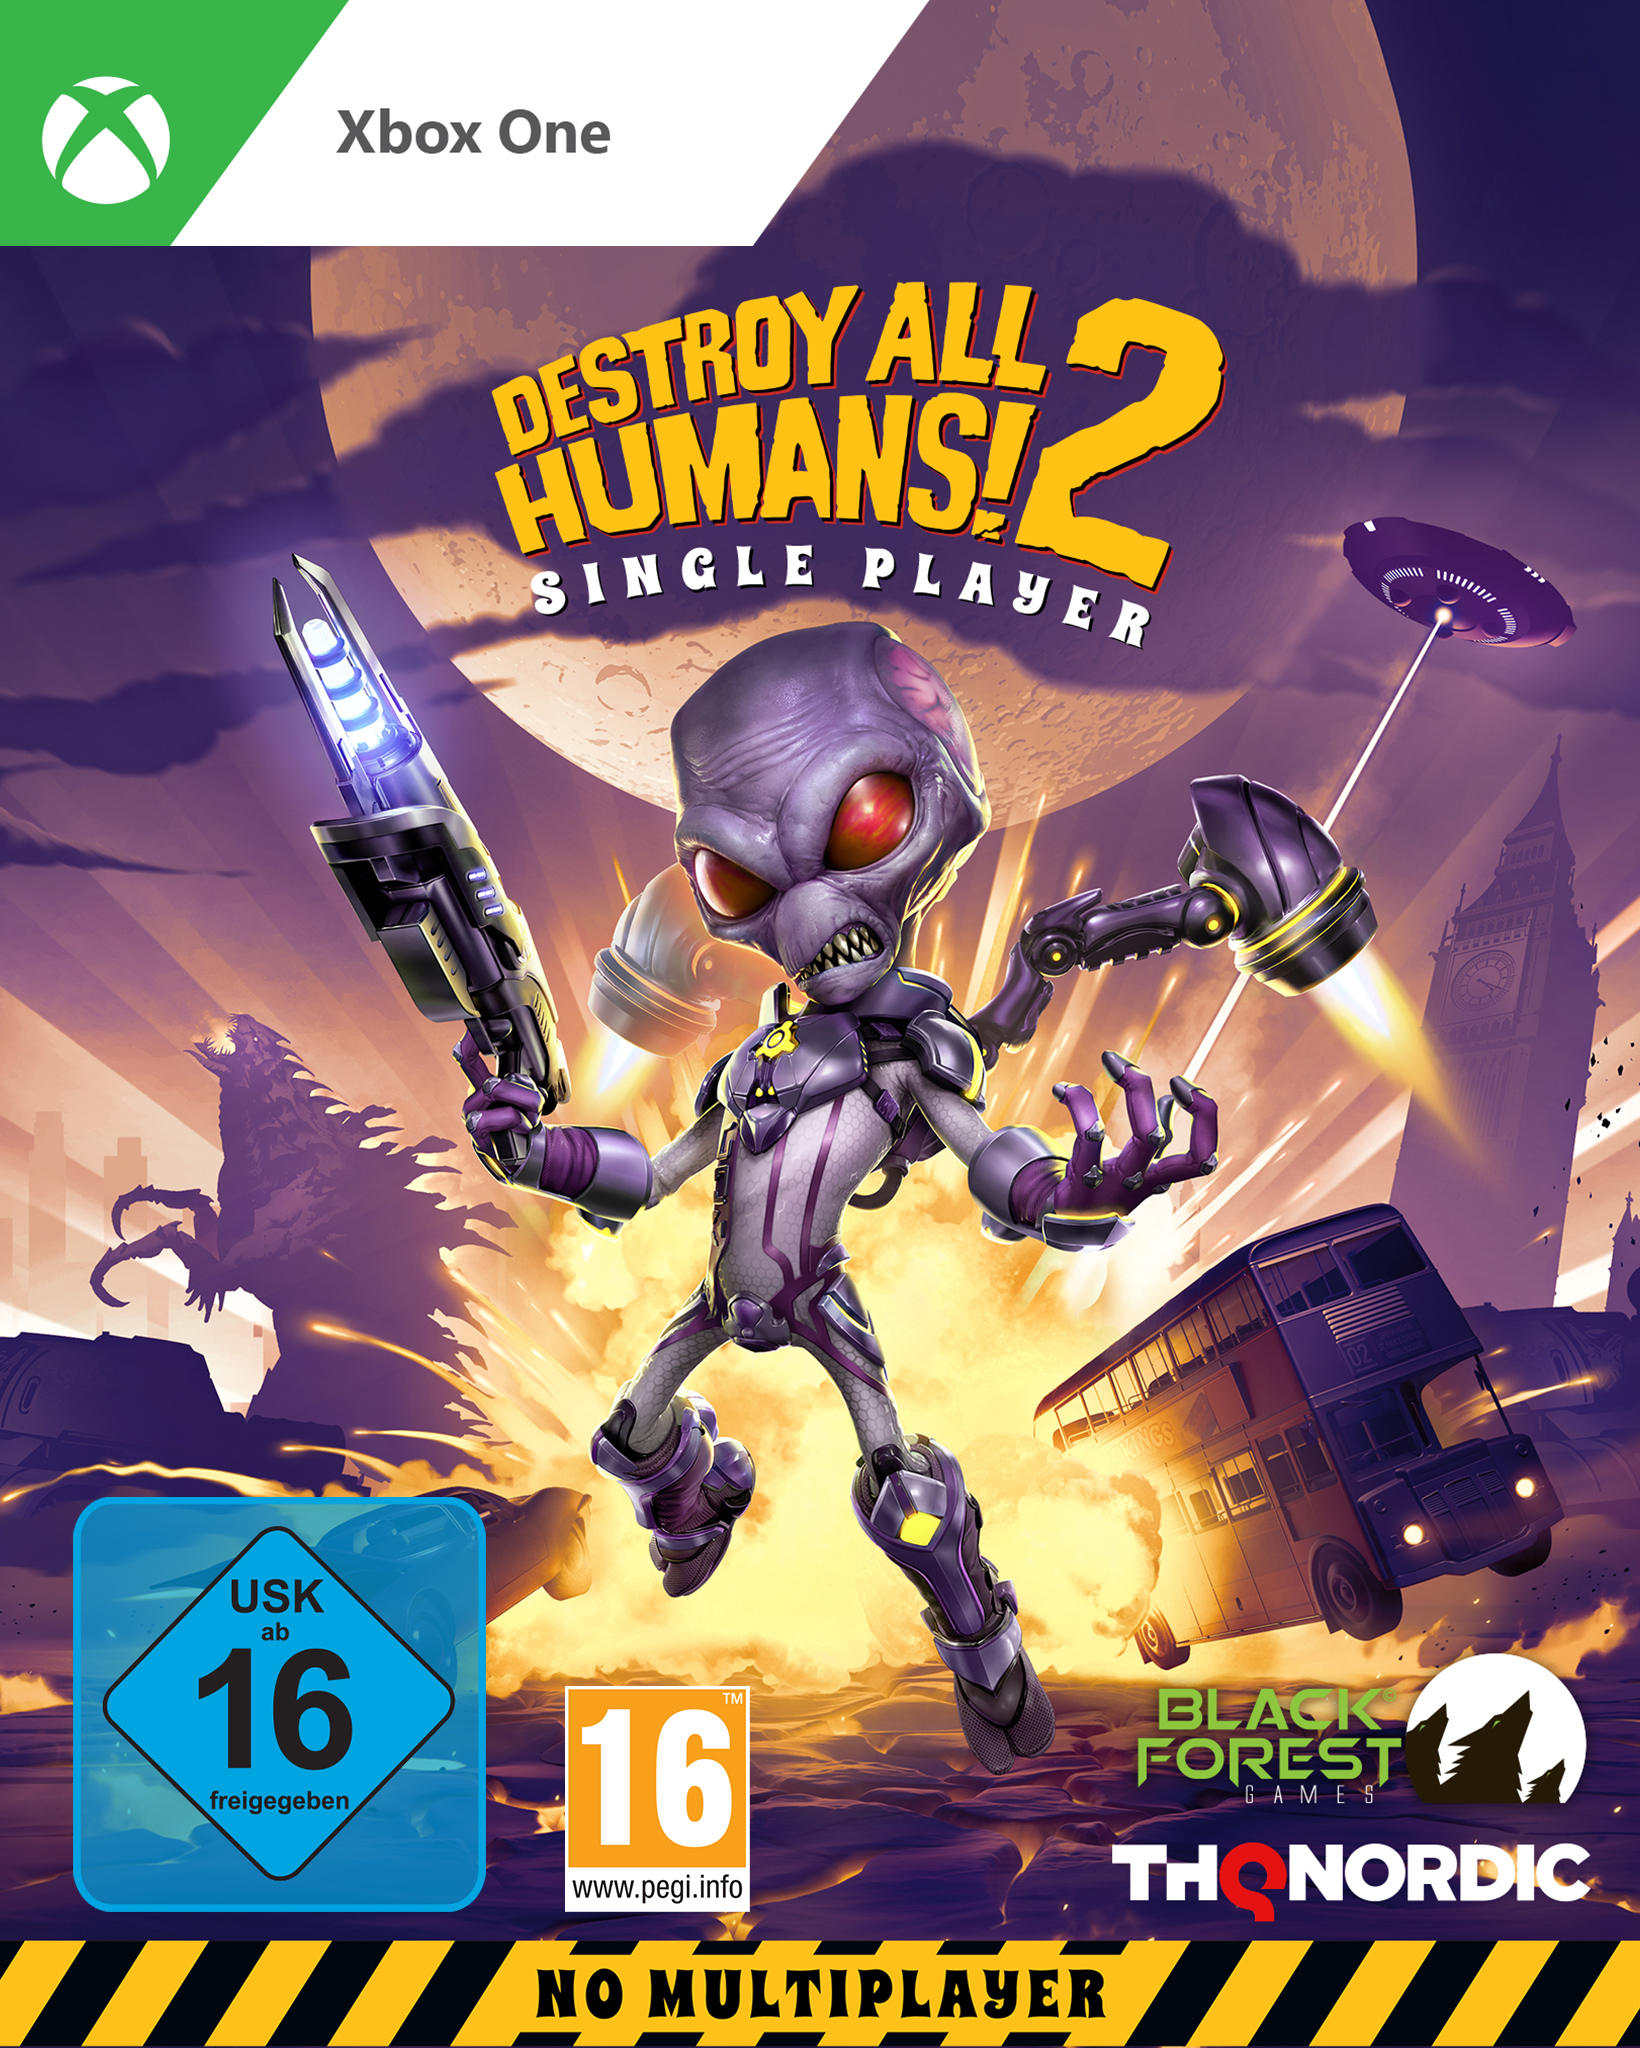 ALL - XBO DESTROY [Xbox One] 2 - REPROBED HUMANS